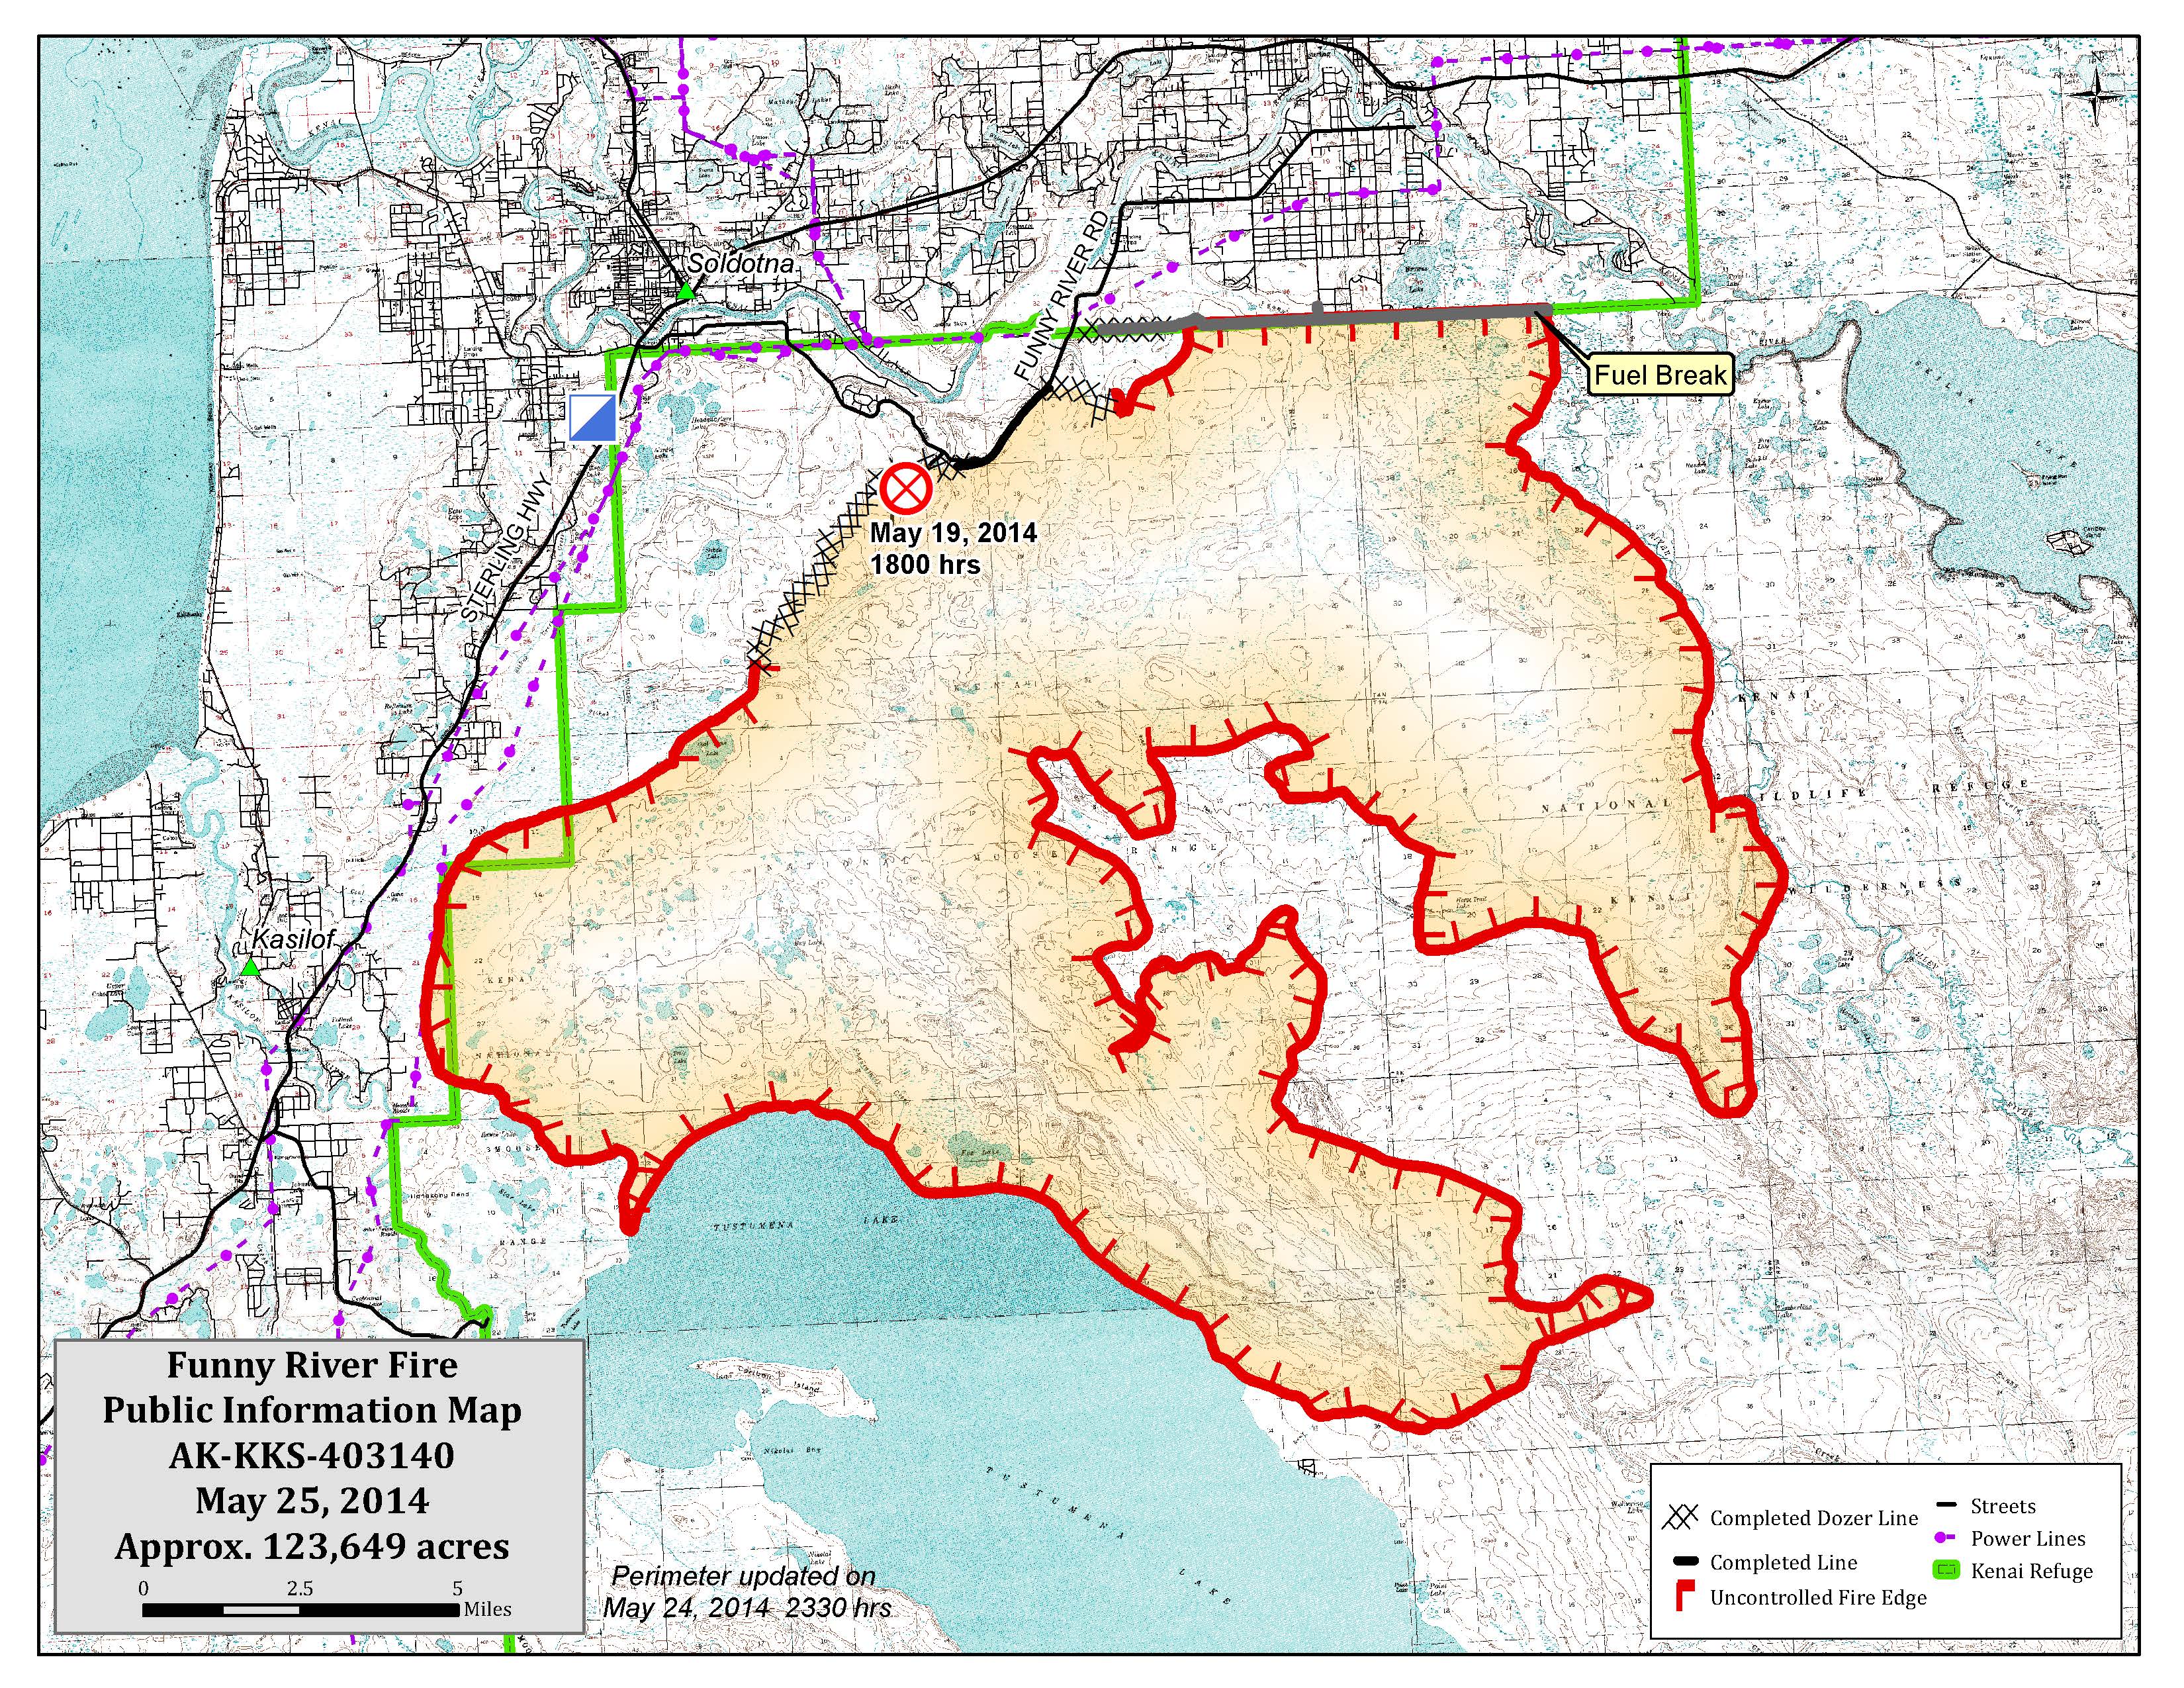 FUNNY RIVER FIRE UPDATE 123,649 acres with 20 percent containment - KPBSD  Communications Field NotesKenai Peninsula Borough School District | Sharing  Stories ~ Learn, Connect, Engage